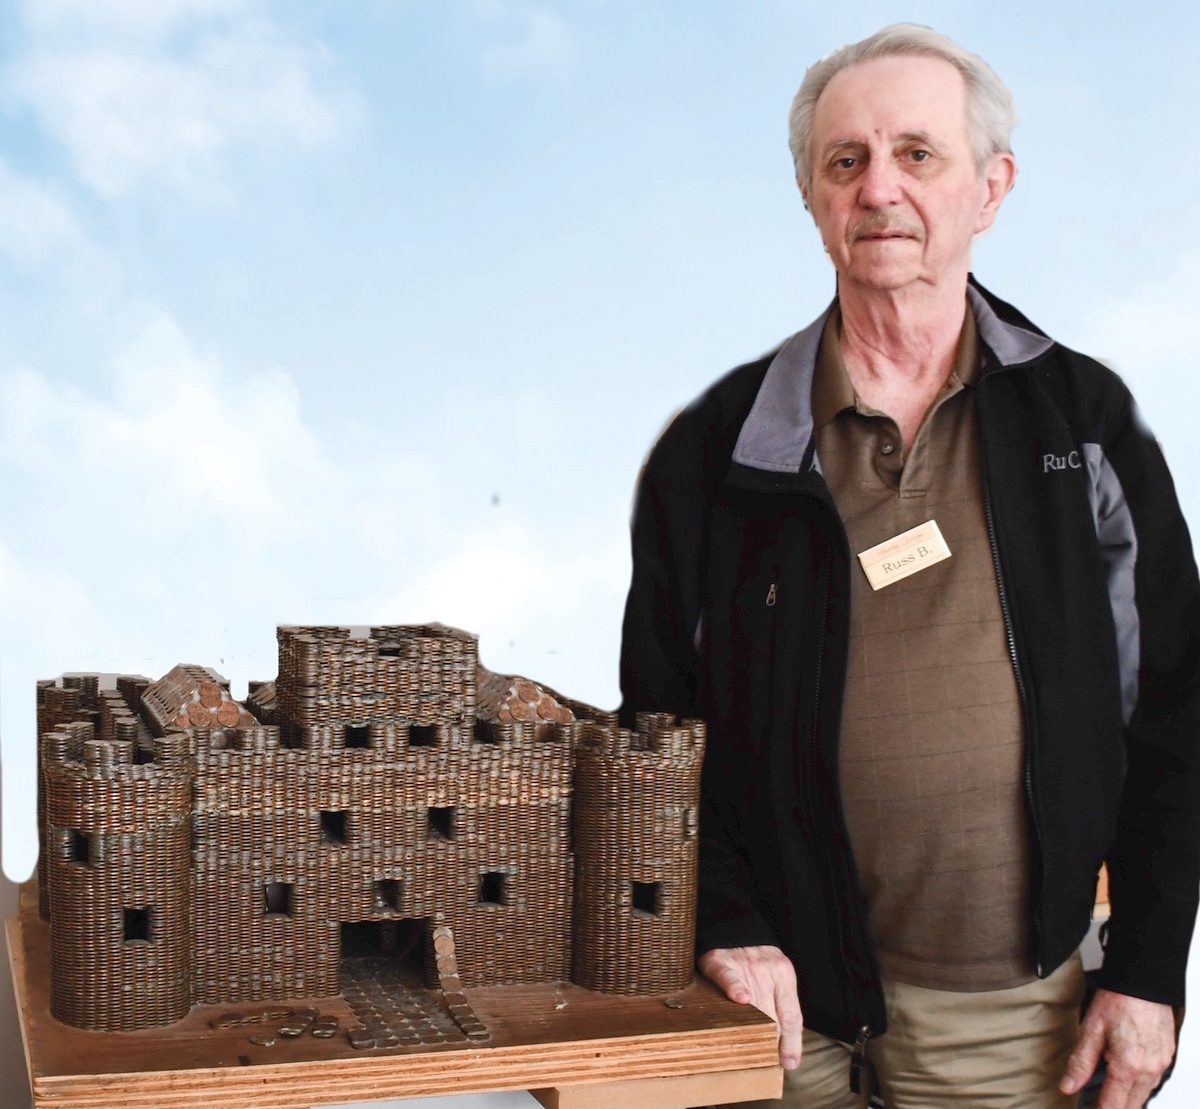 Completed in 1995, it took Becker 13 years to build his model penny castle. It weighs about 200 pounds and its value in pennies is approximately $241.52.